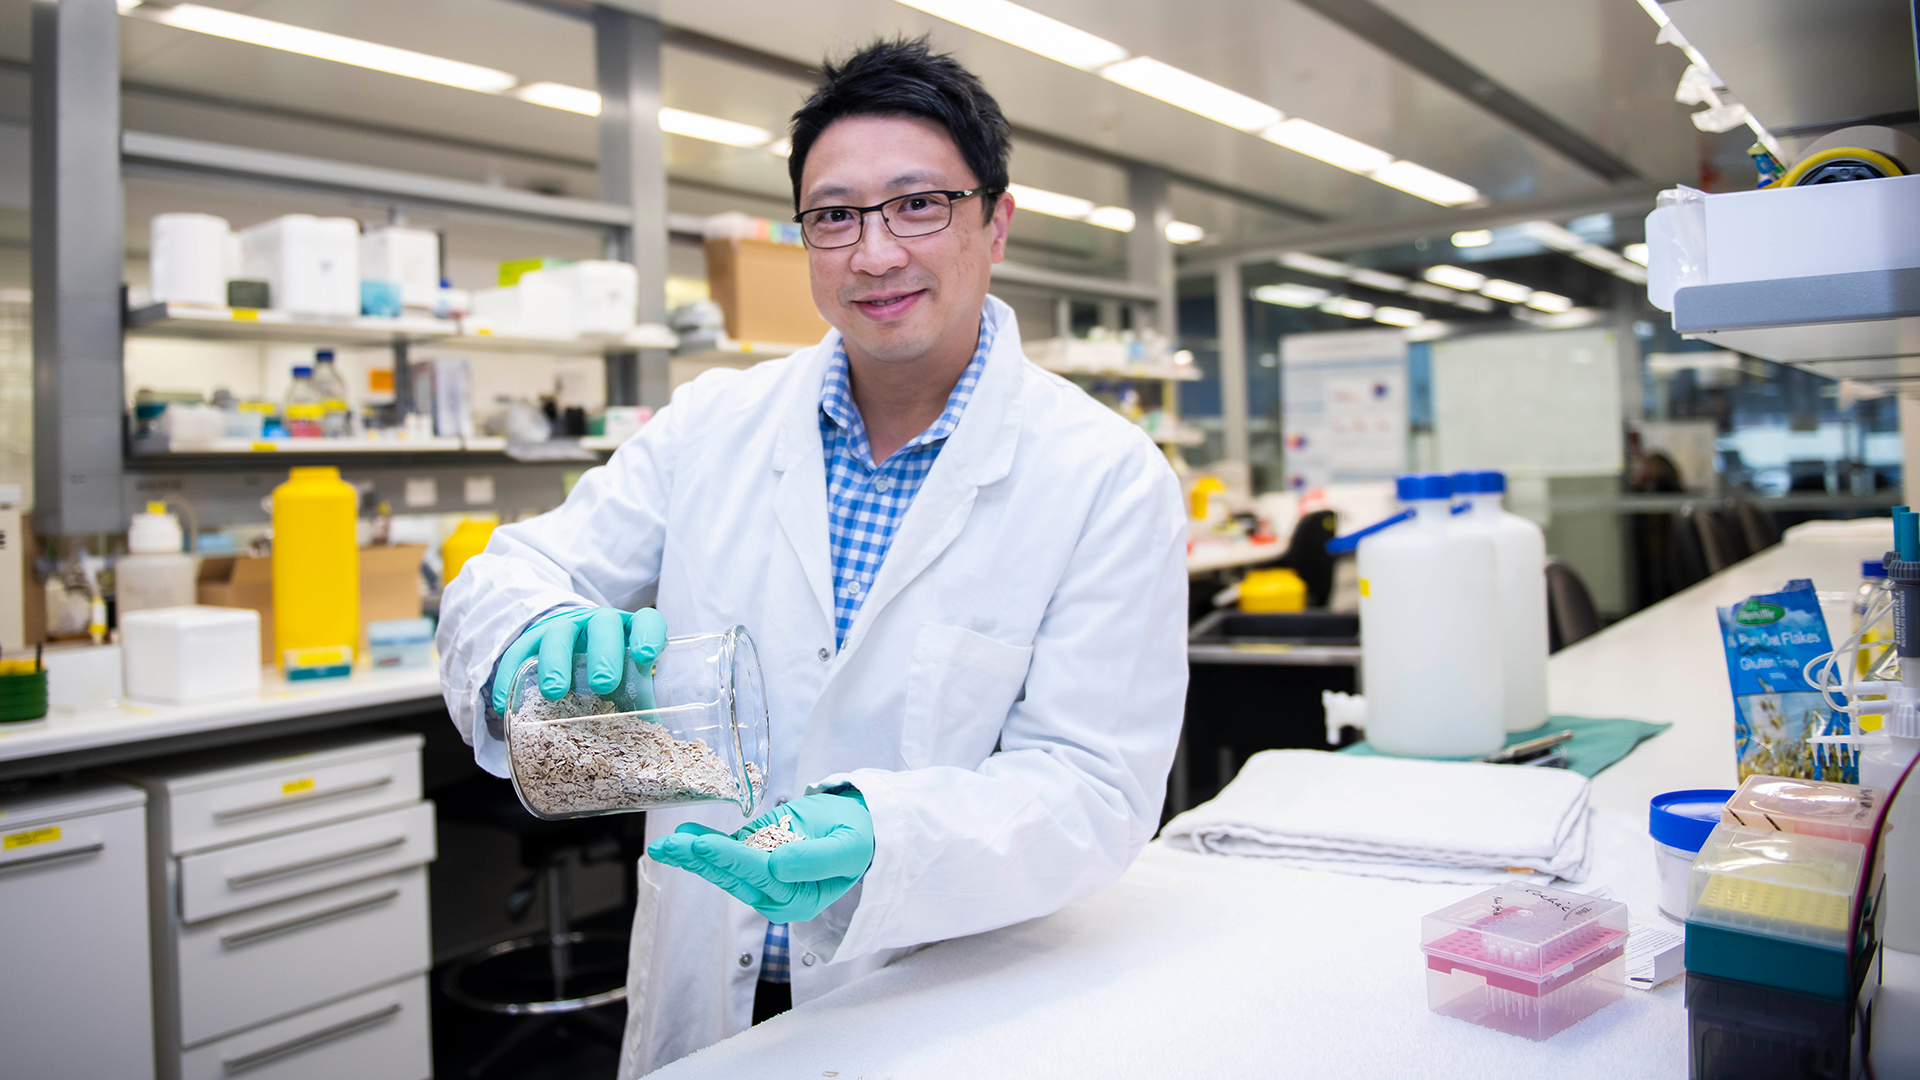 Assoc. Prof Jason Tye-Din is researching the Interleukin-2 (IL-2) testing method for diagnosing coeliac disease and the severity of its symptoms.